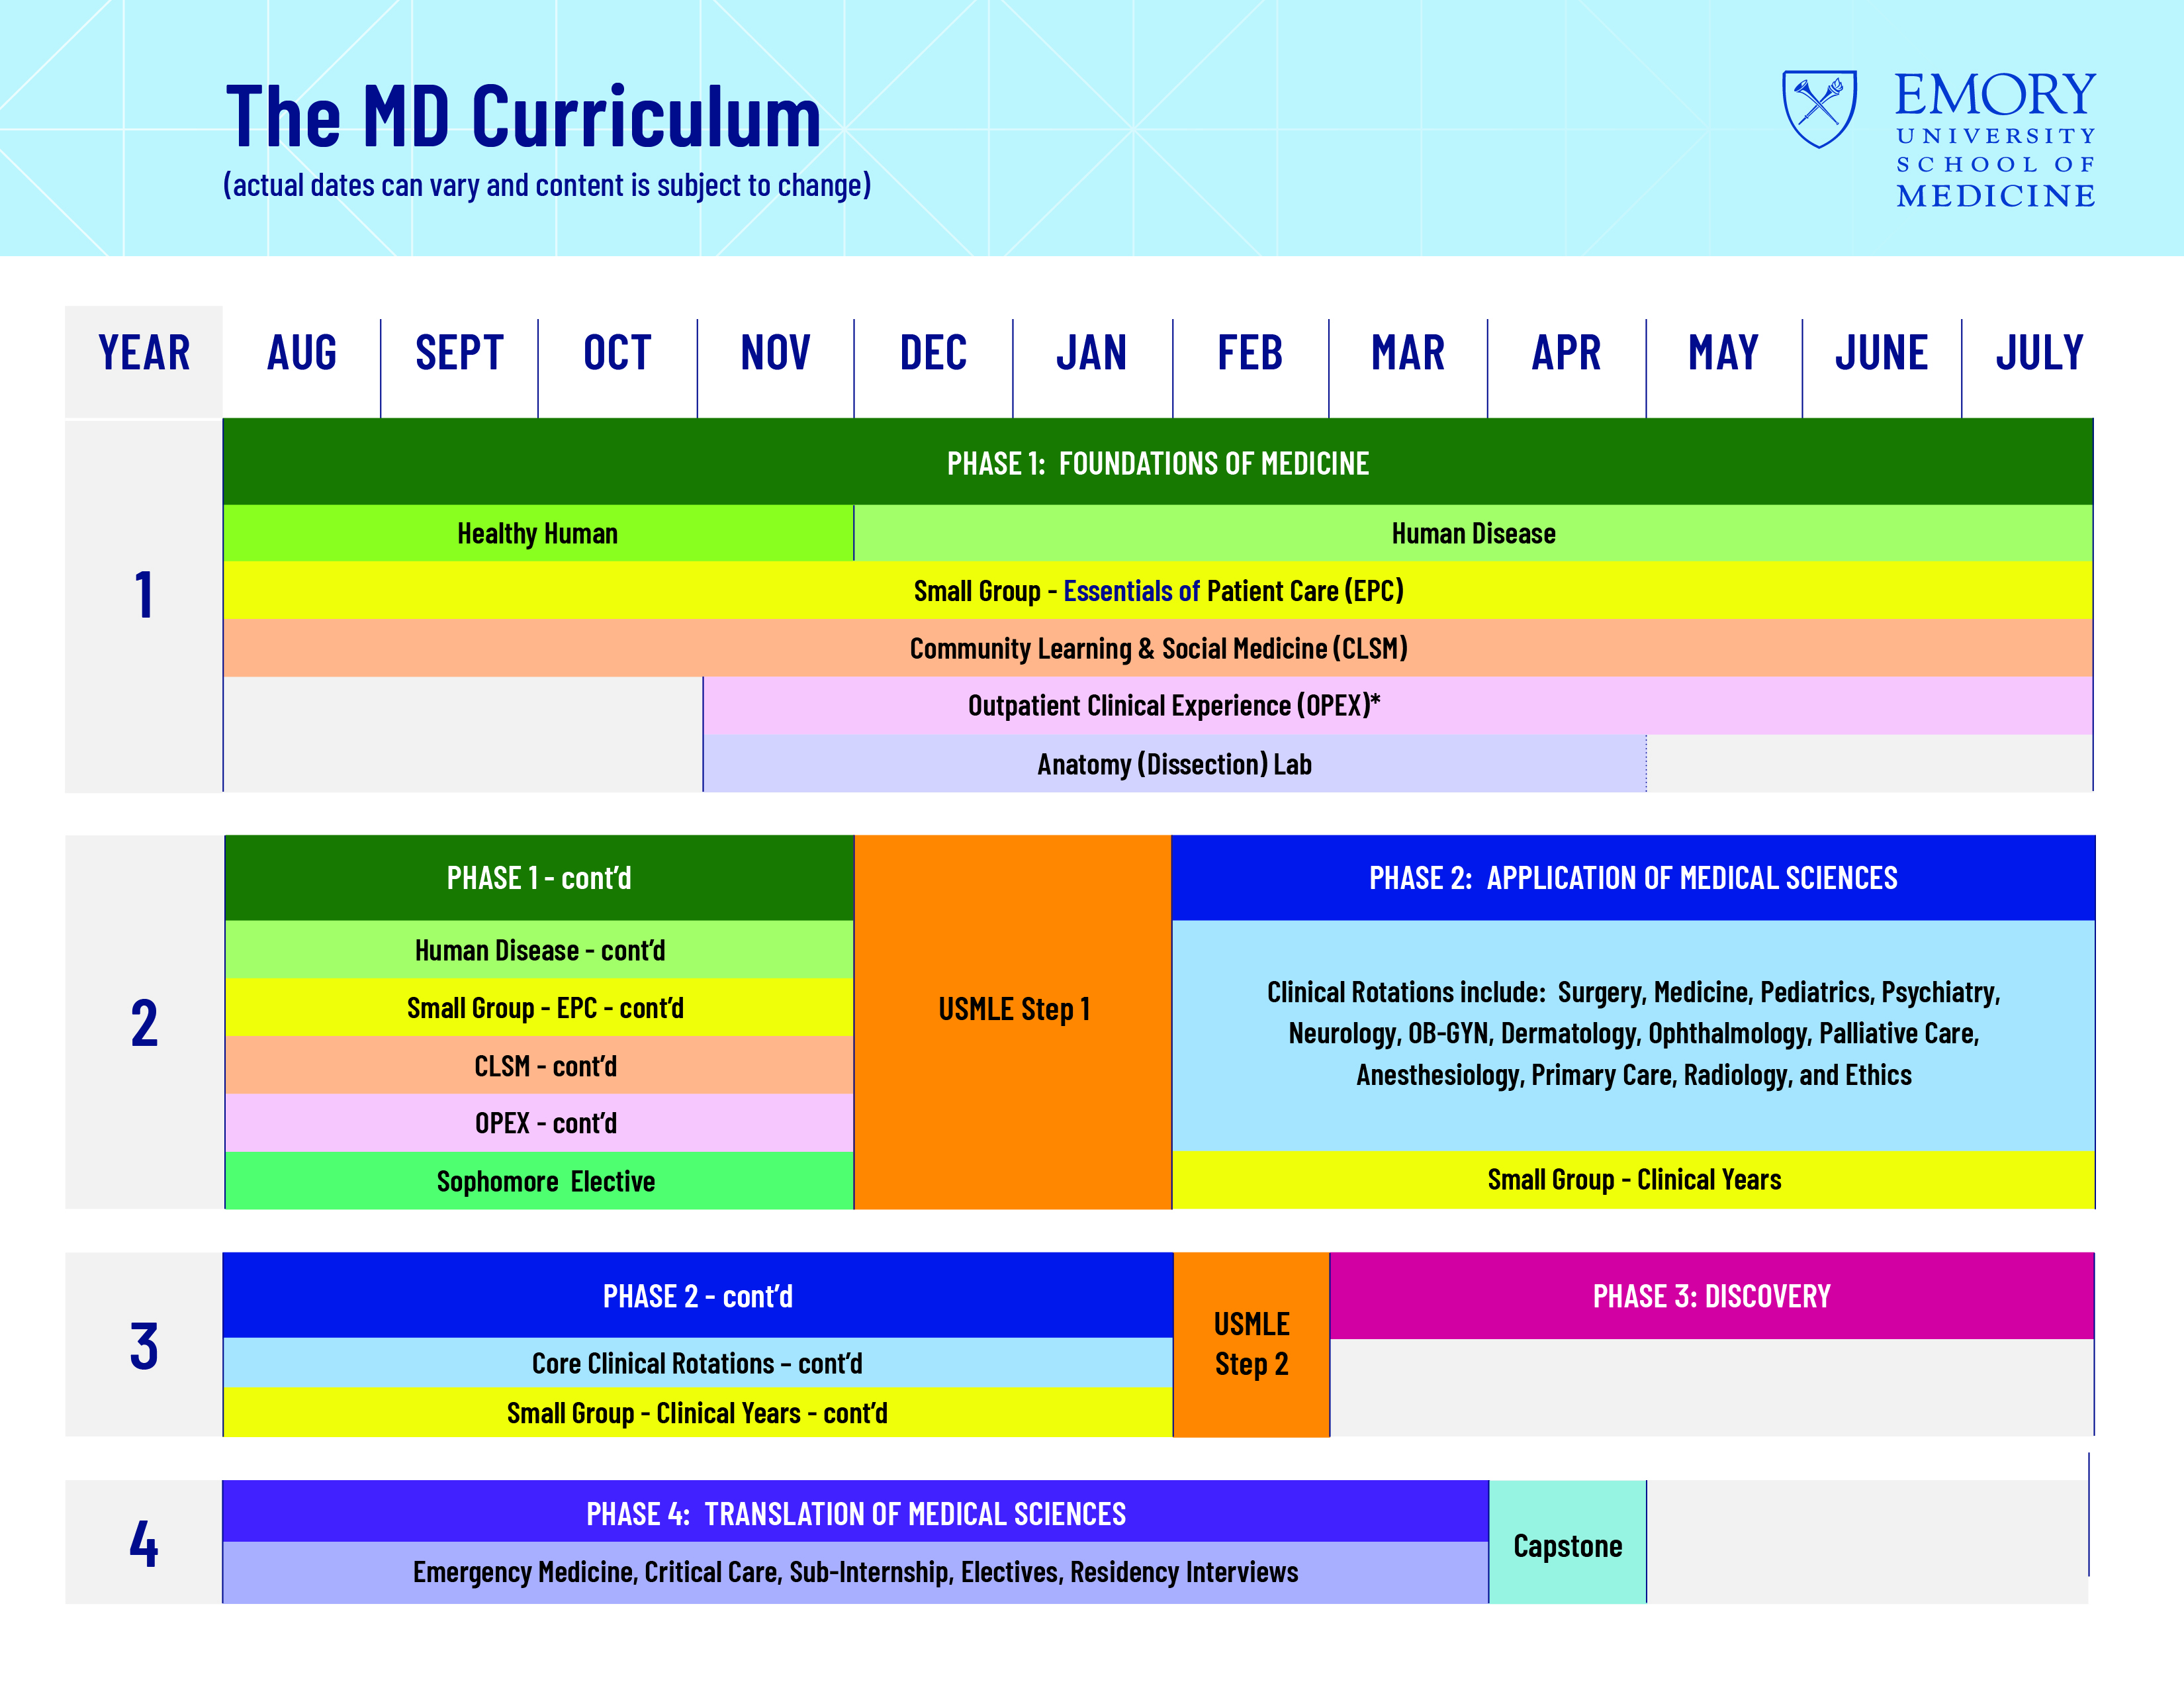 Four Phases in Four Years - The MD Curriculum for the Emory School of Medicine